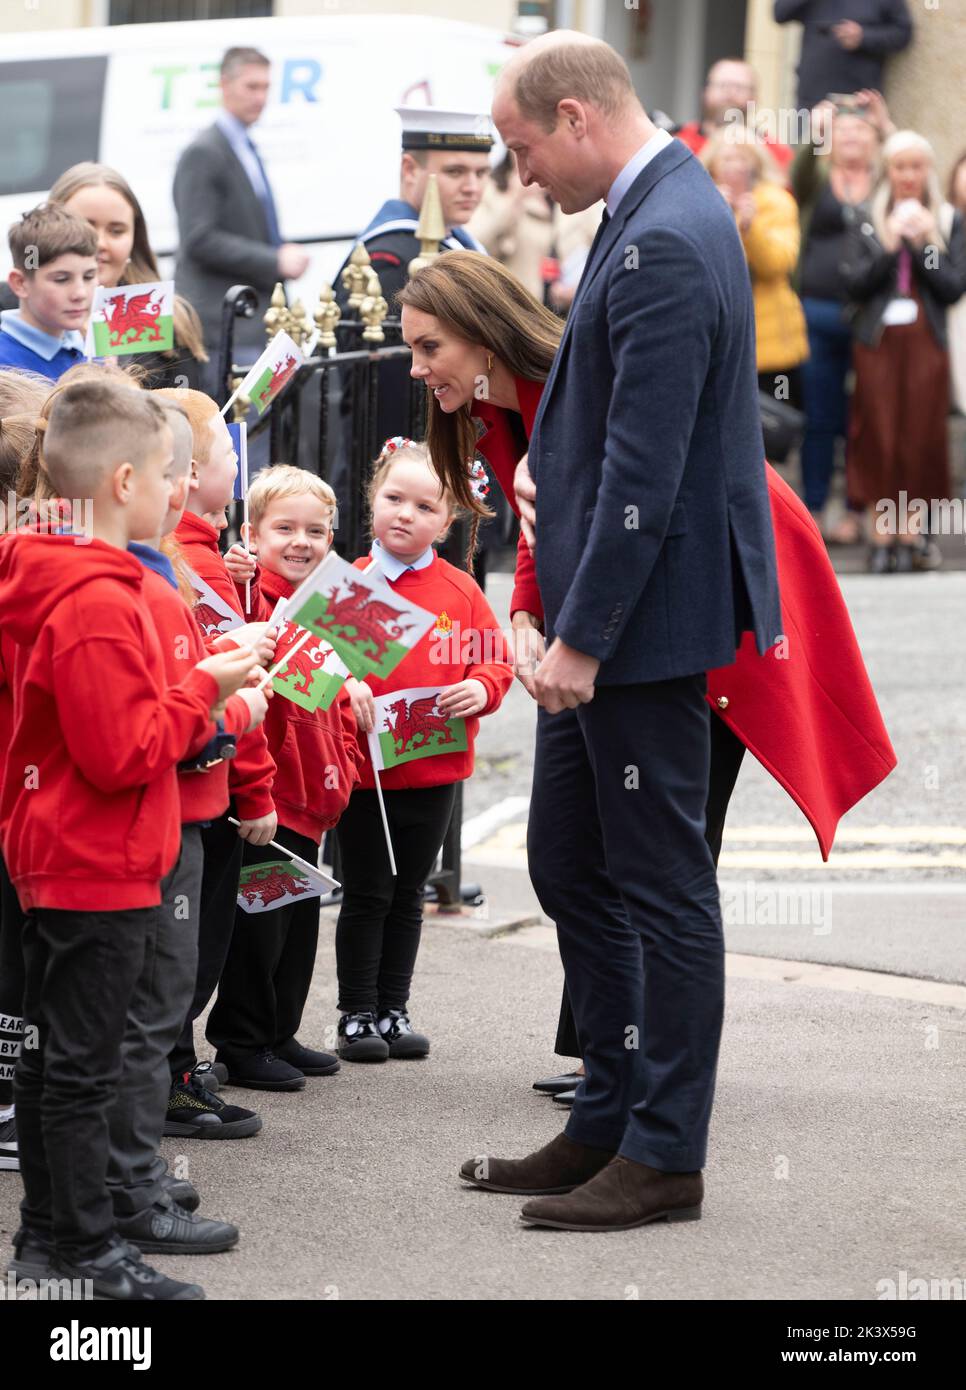 Swansea, Wales, UK. 27 September, 2022.  Prince William, Prince of Wales and Catherine, Princess of Wales  meet the public during a visit to St Thomas Stock Photo